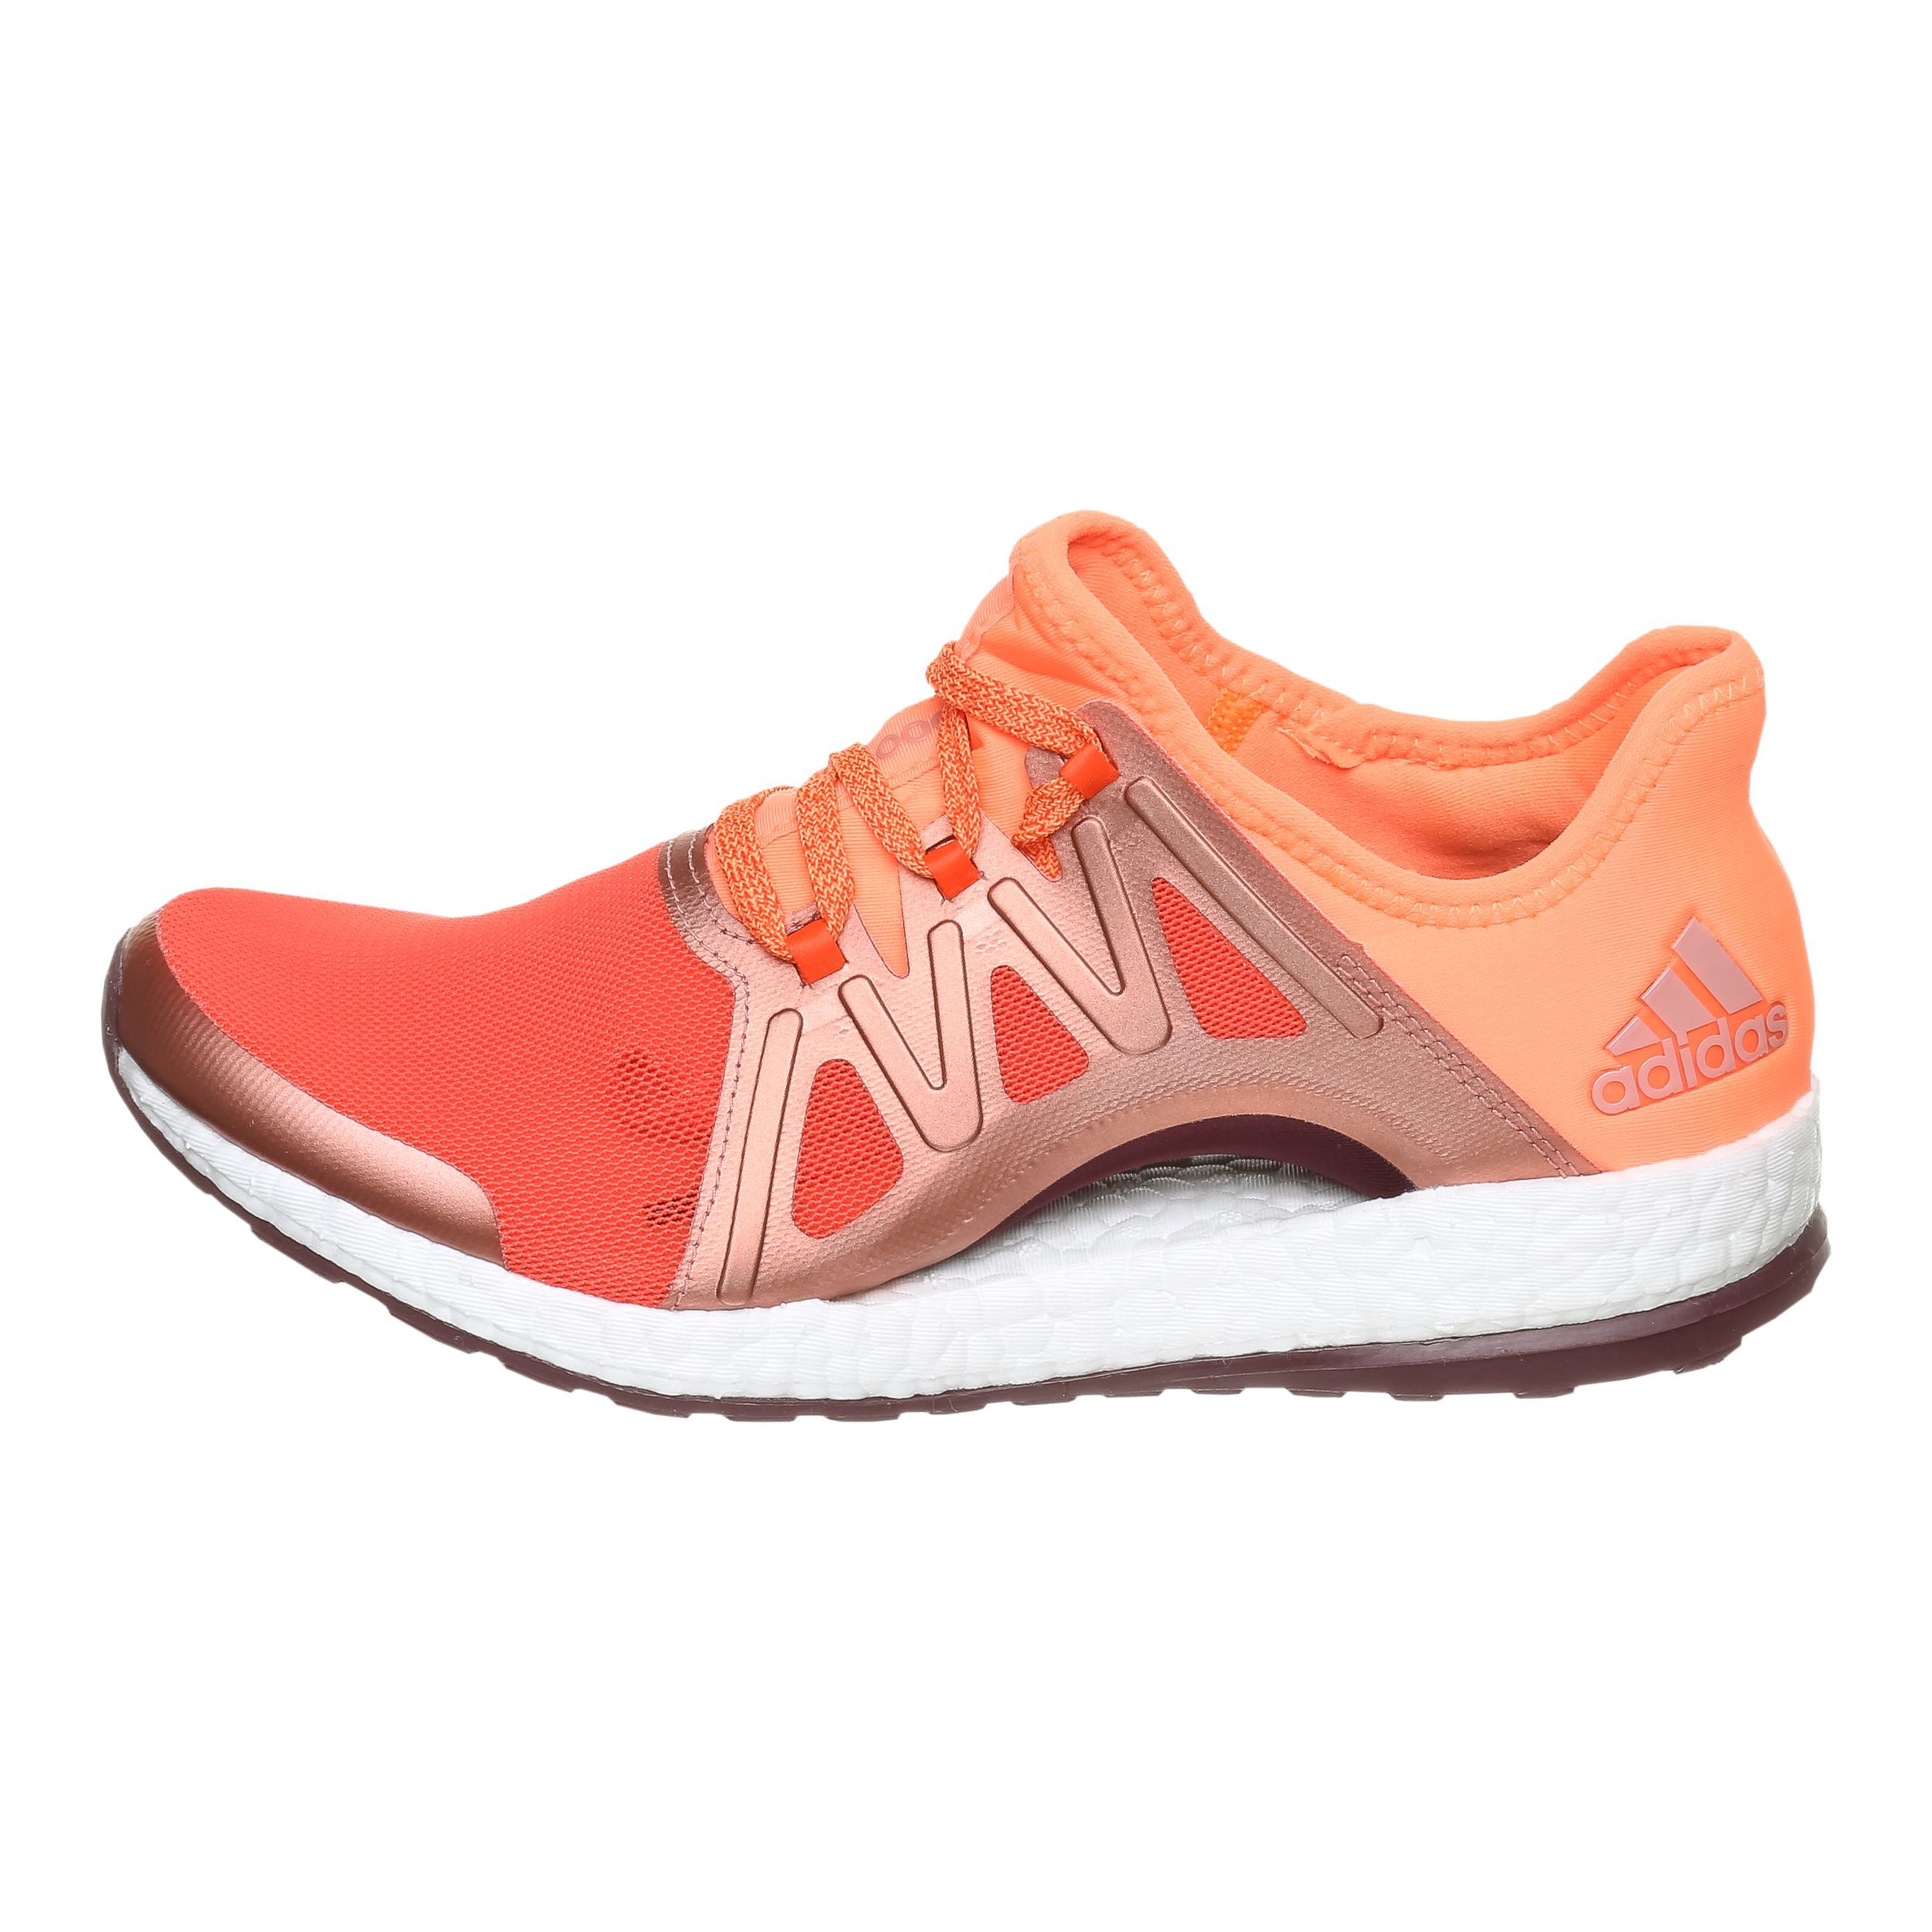 adidas pure boost endless energy women's